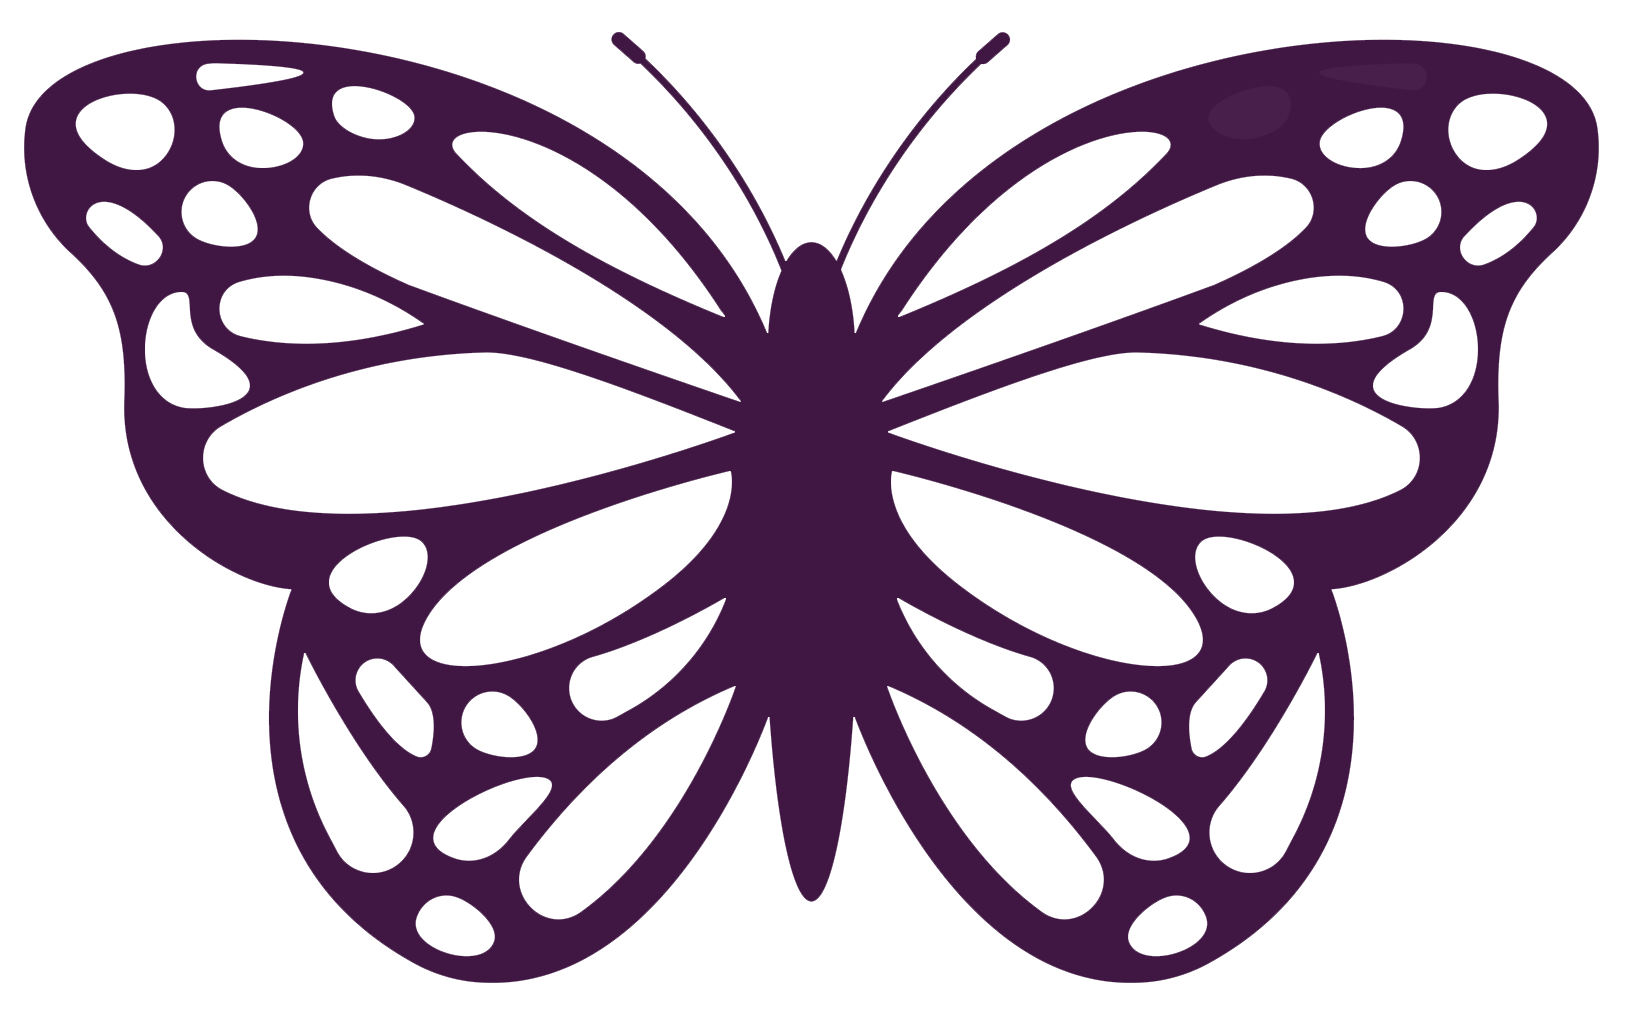 Butterfly Divider | Bloomsburg, PA | Snavely Accounting Service Inc. DBA Knelly Tax & Accounting Services